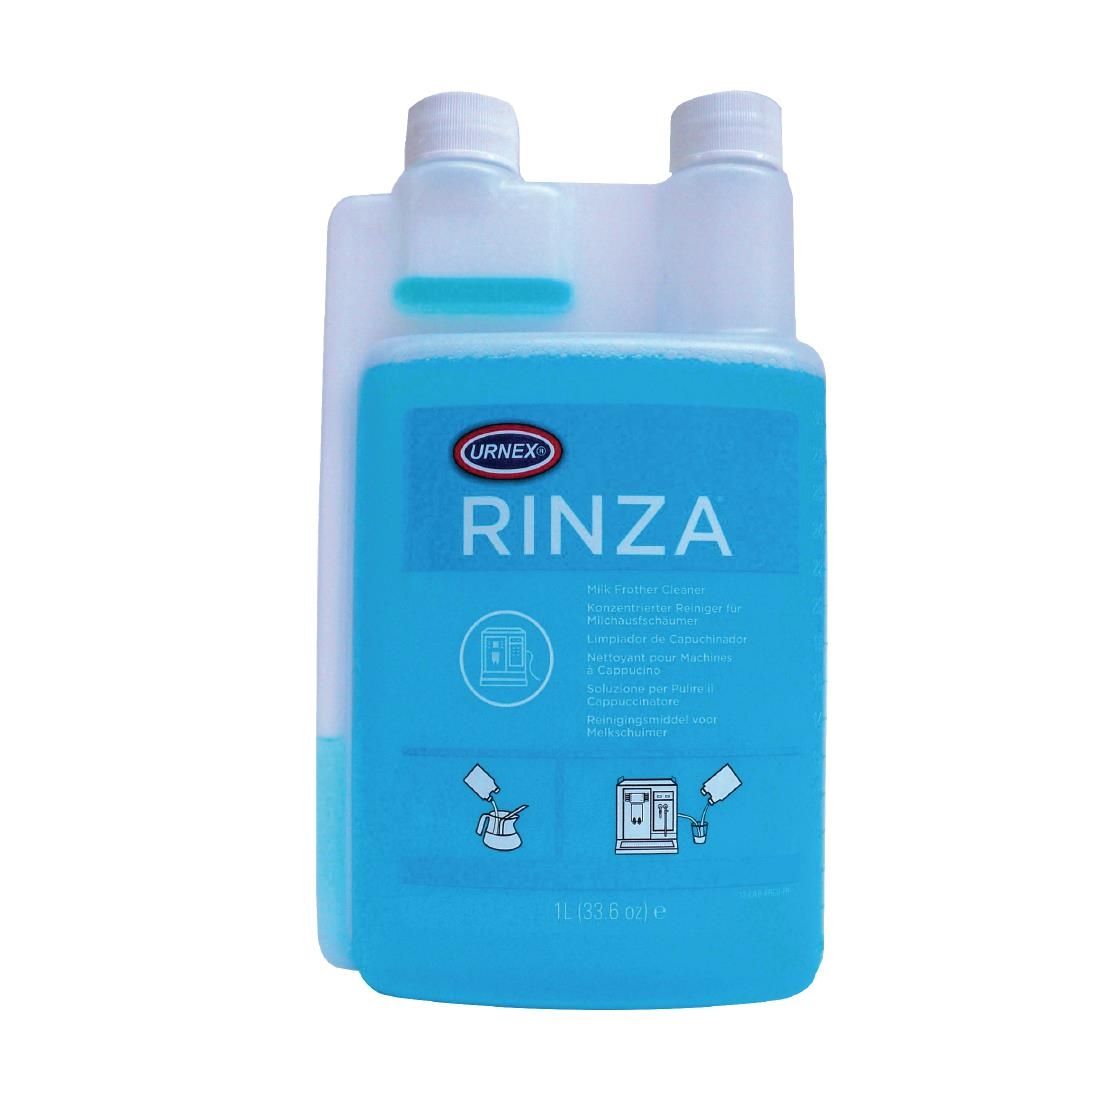 GG952 Urnex Rinza Alkaline Milk Frother Cleaner Concentrate 1.1Ltr